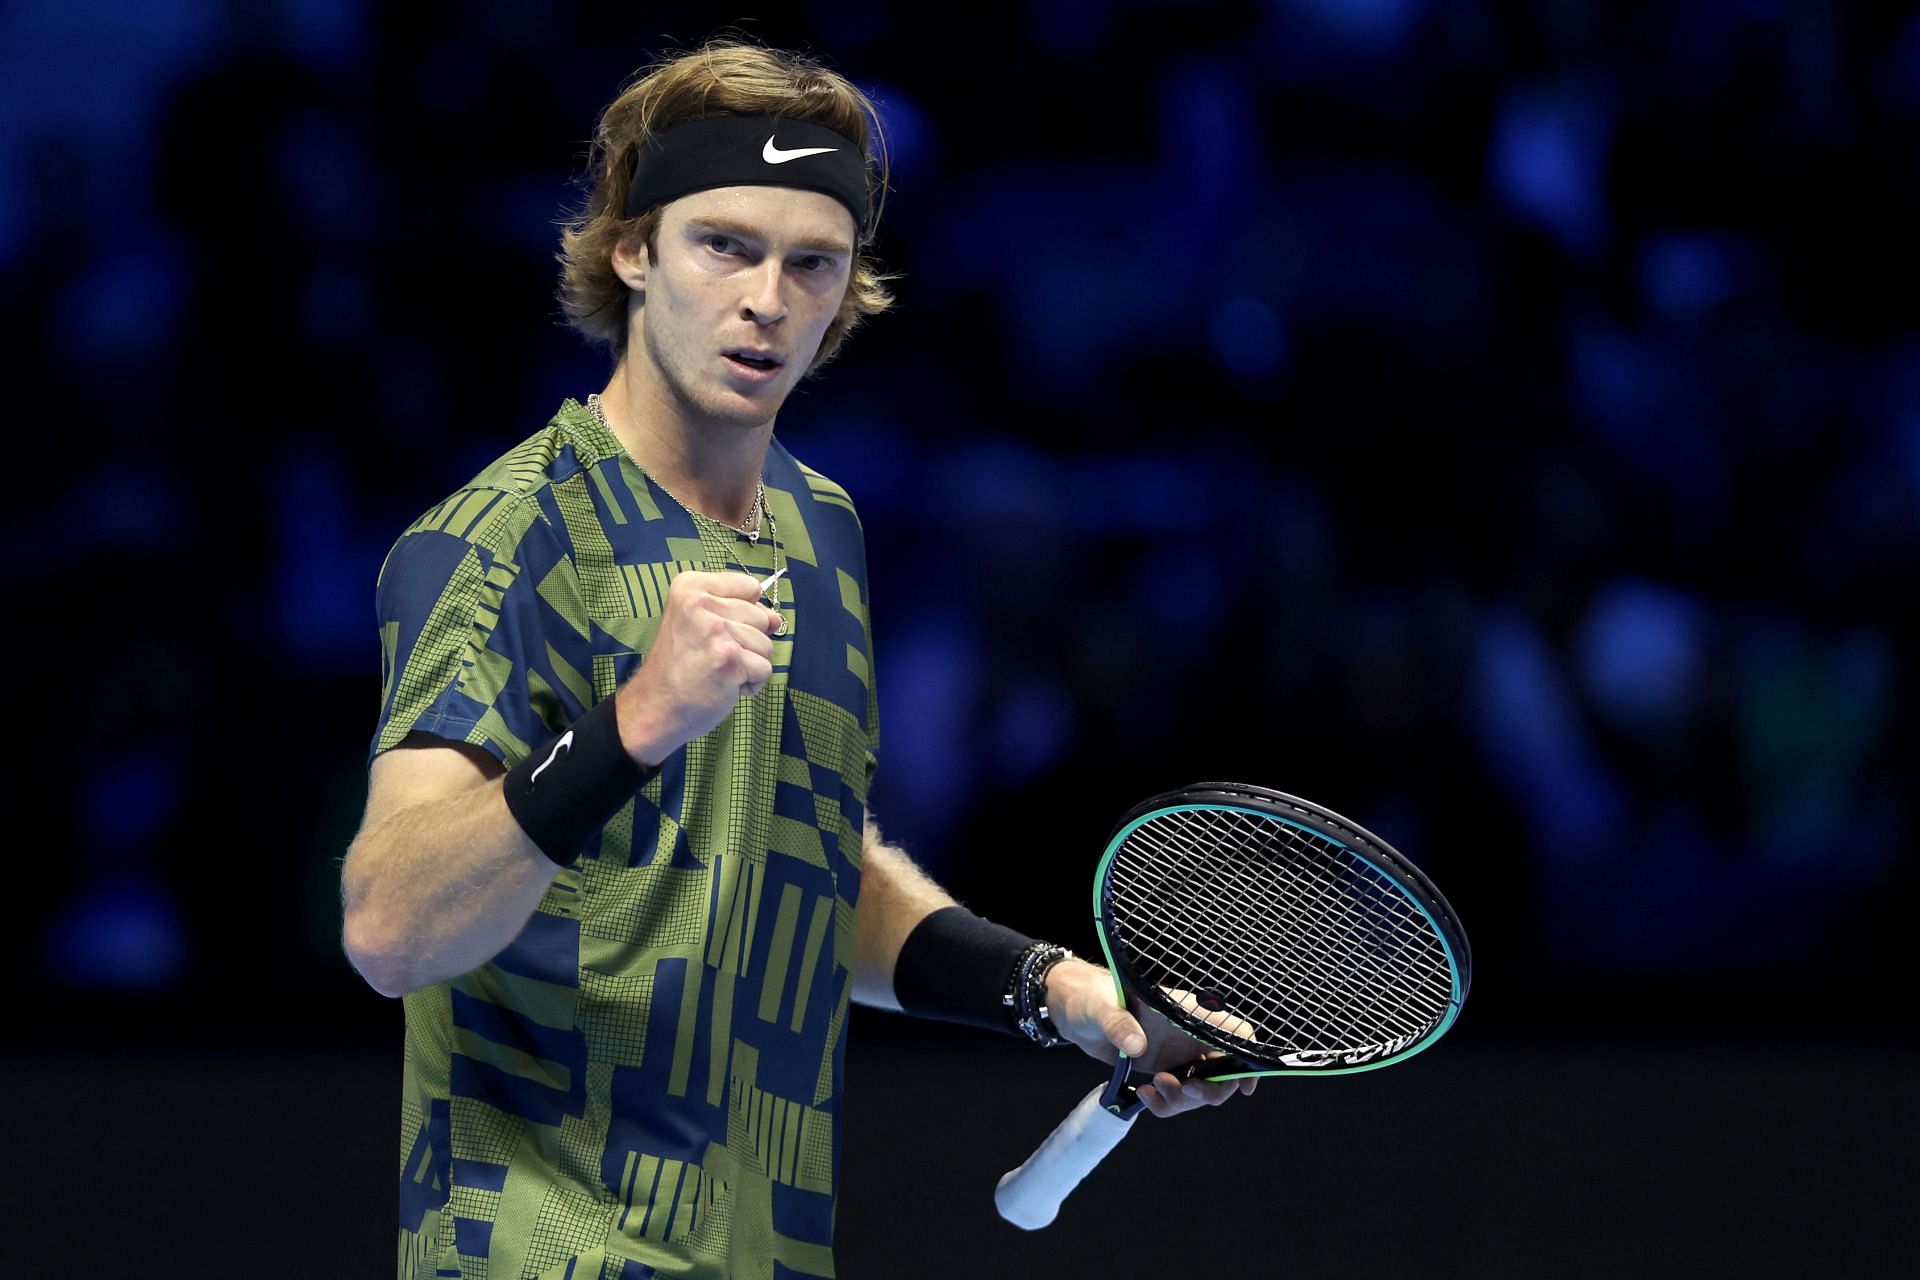 Andrey Rublev pictured during the 2022 Nitto ATP Finals